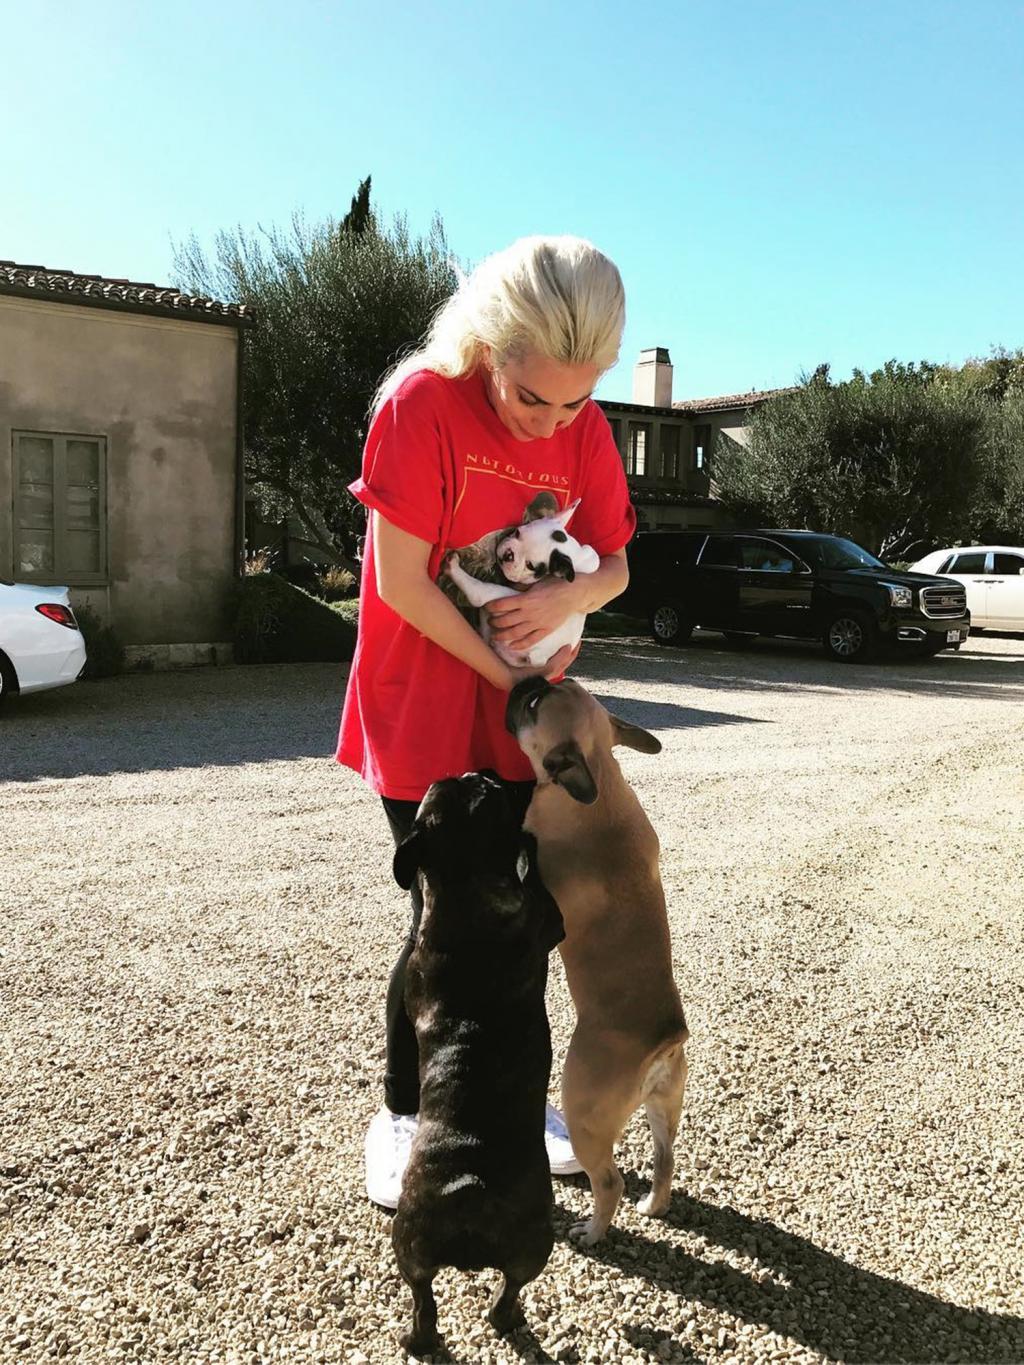 Lady Gaga Welcomes a New Family Member       '  See Her Adorable Puppy!